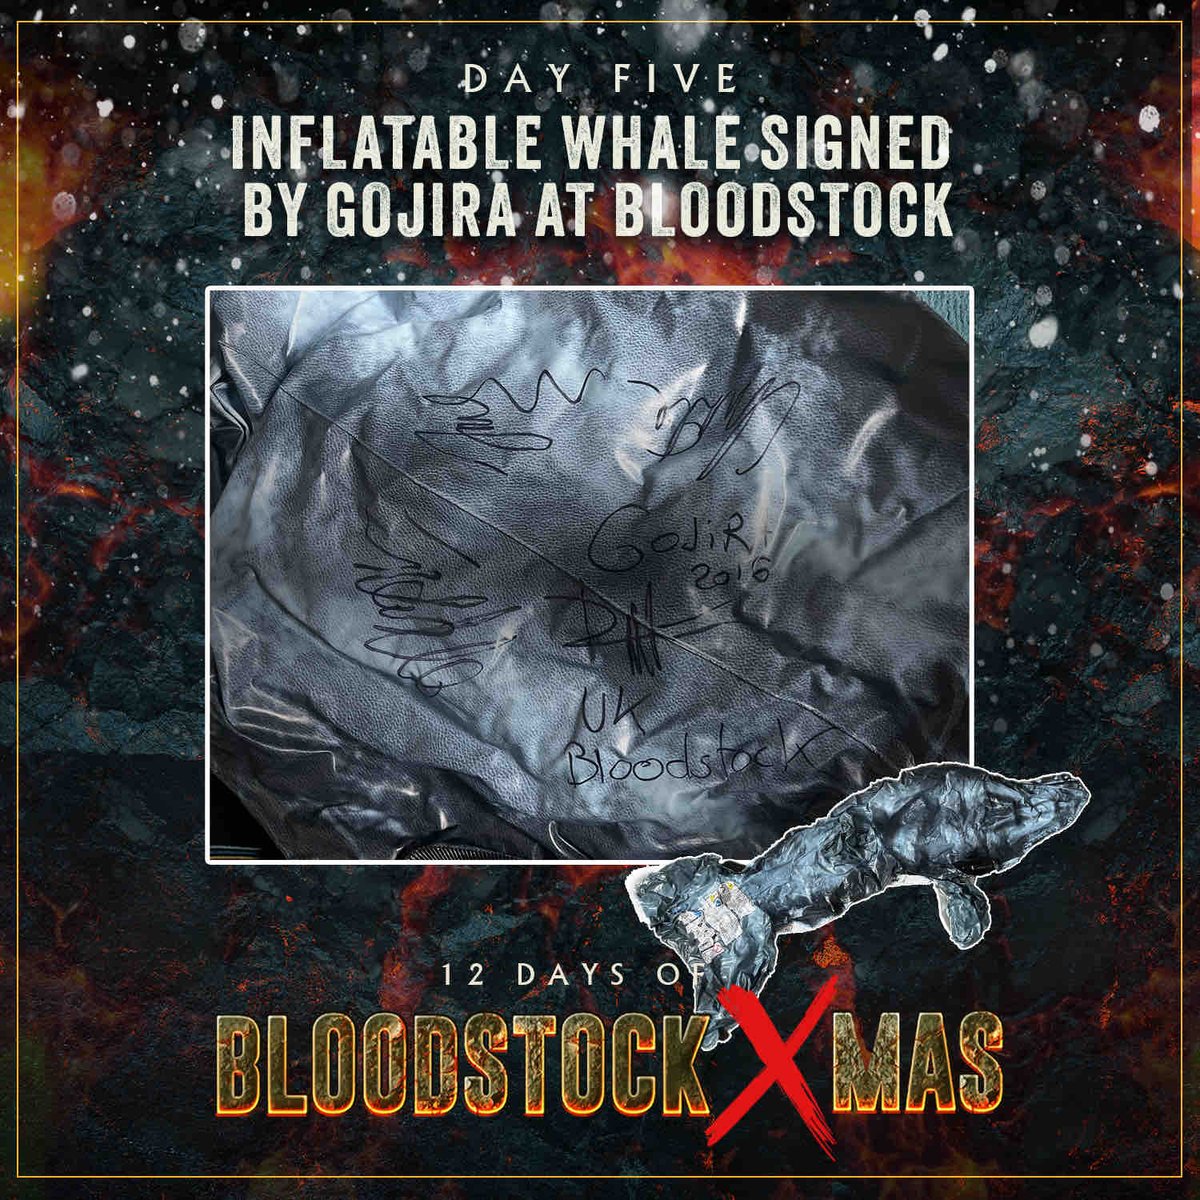 🎅 ON THE FIFTH DAY OF CHRISTMAS, BLOODSTOCK GAVE TO ME 🎁.. An inflatable whale signed by the mighty @Gojira at Bloodstock 🐋 Head over to the Bloodstock Facebook or Instagram to enter!